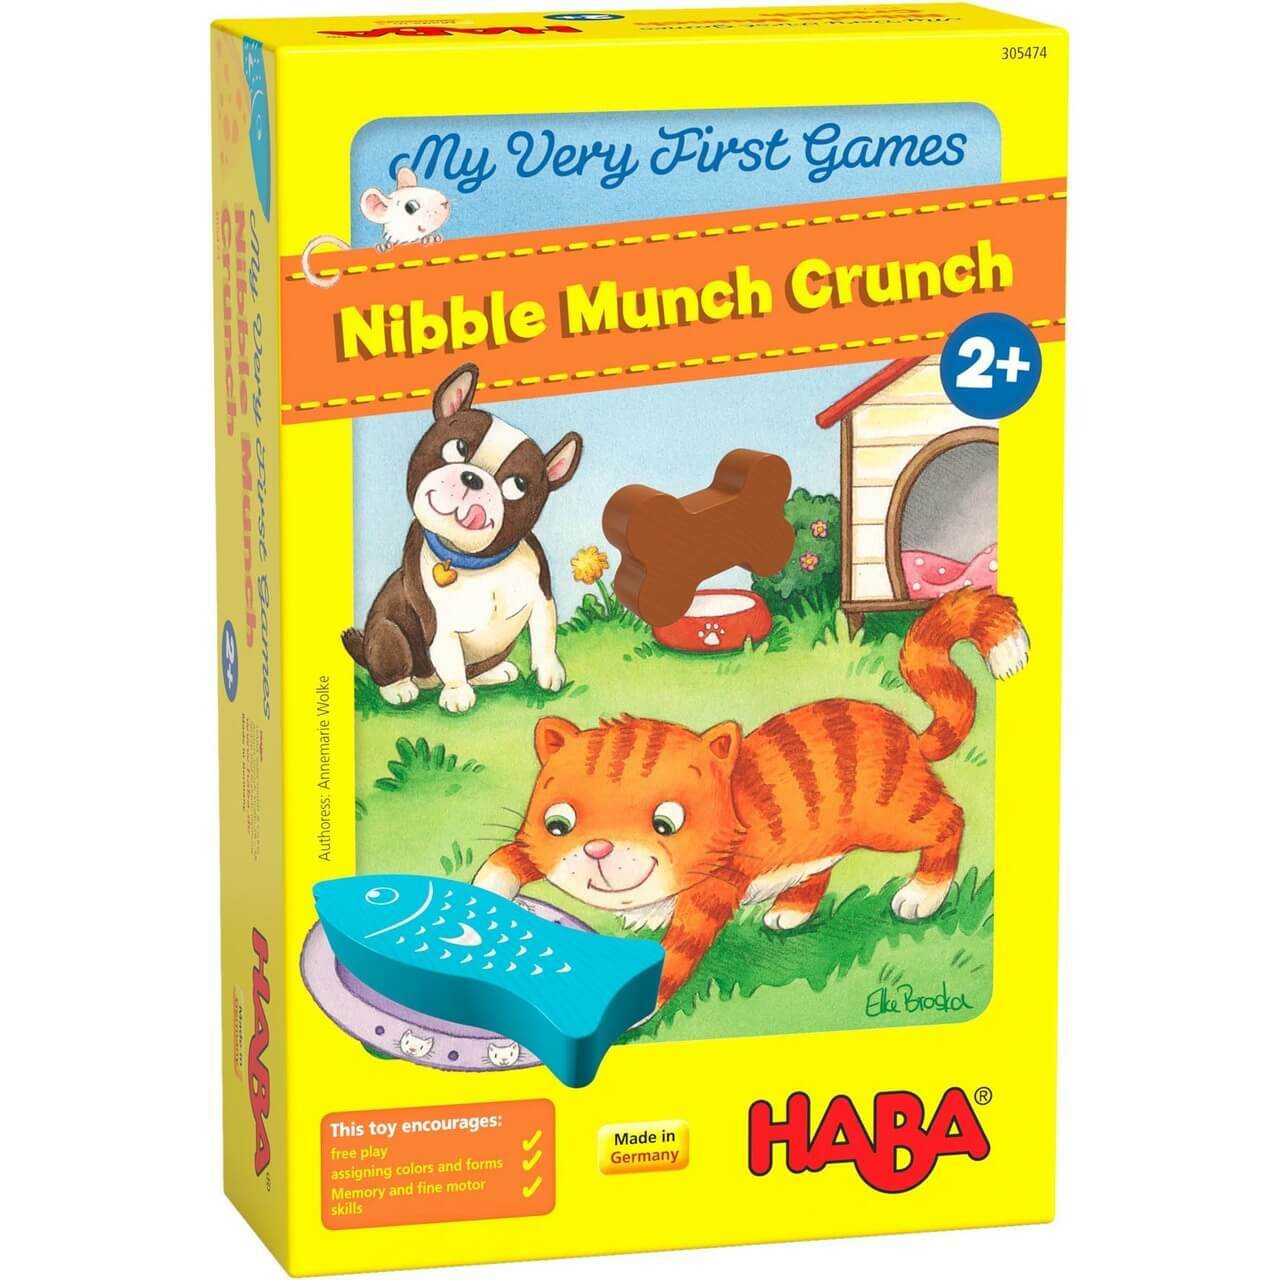 Nibble Munch Crunch - My Very First Games